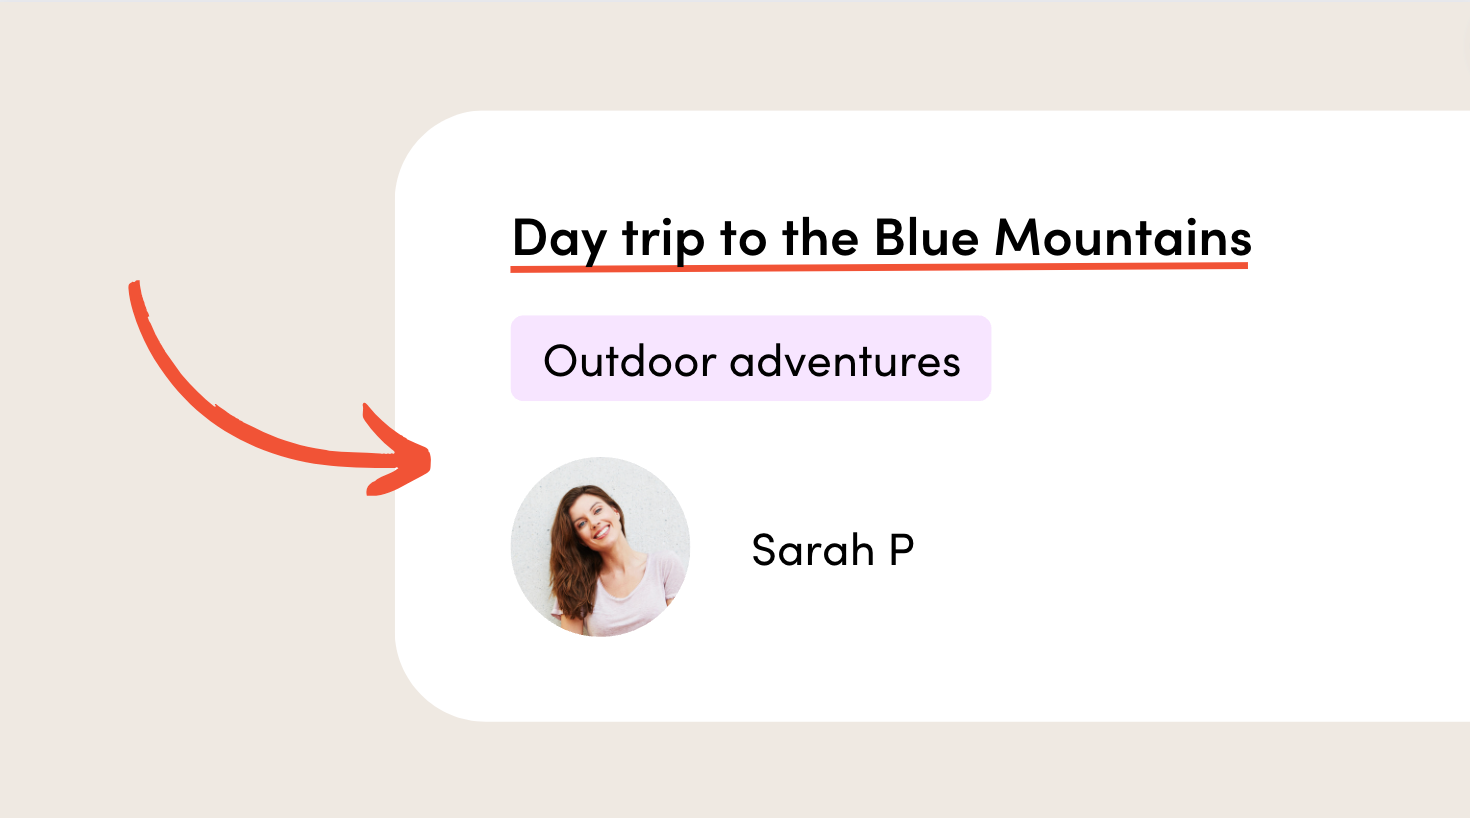 A Social Carer Activity about a day trip to the Blue Mountains